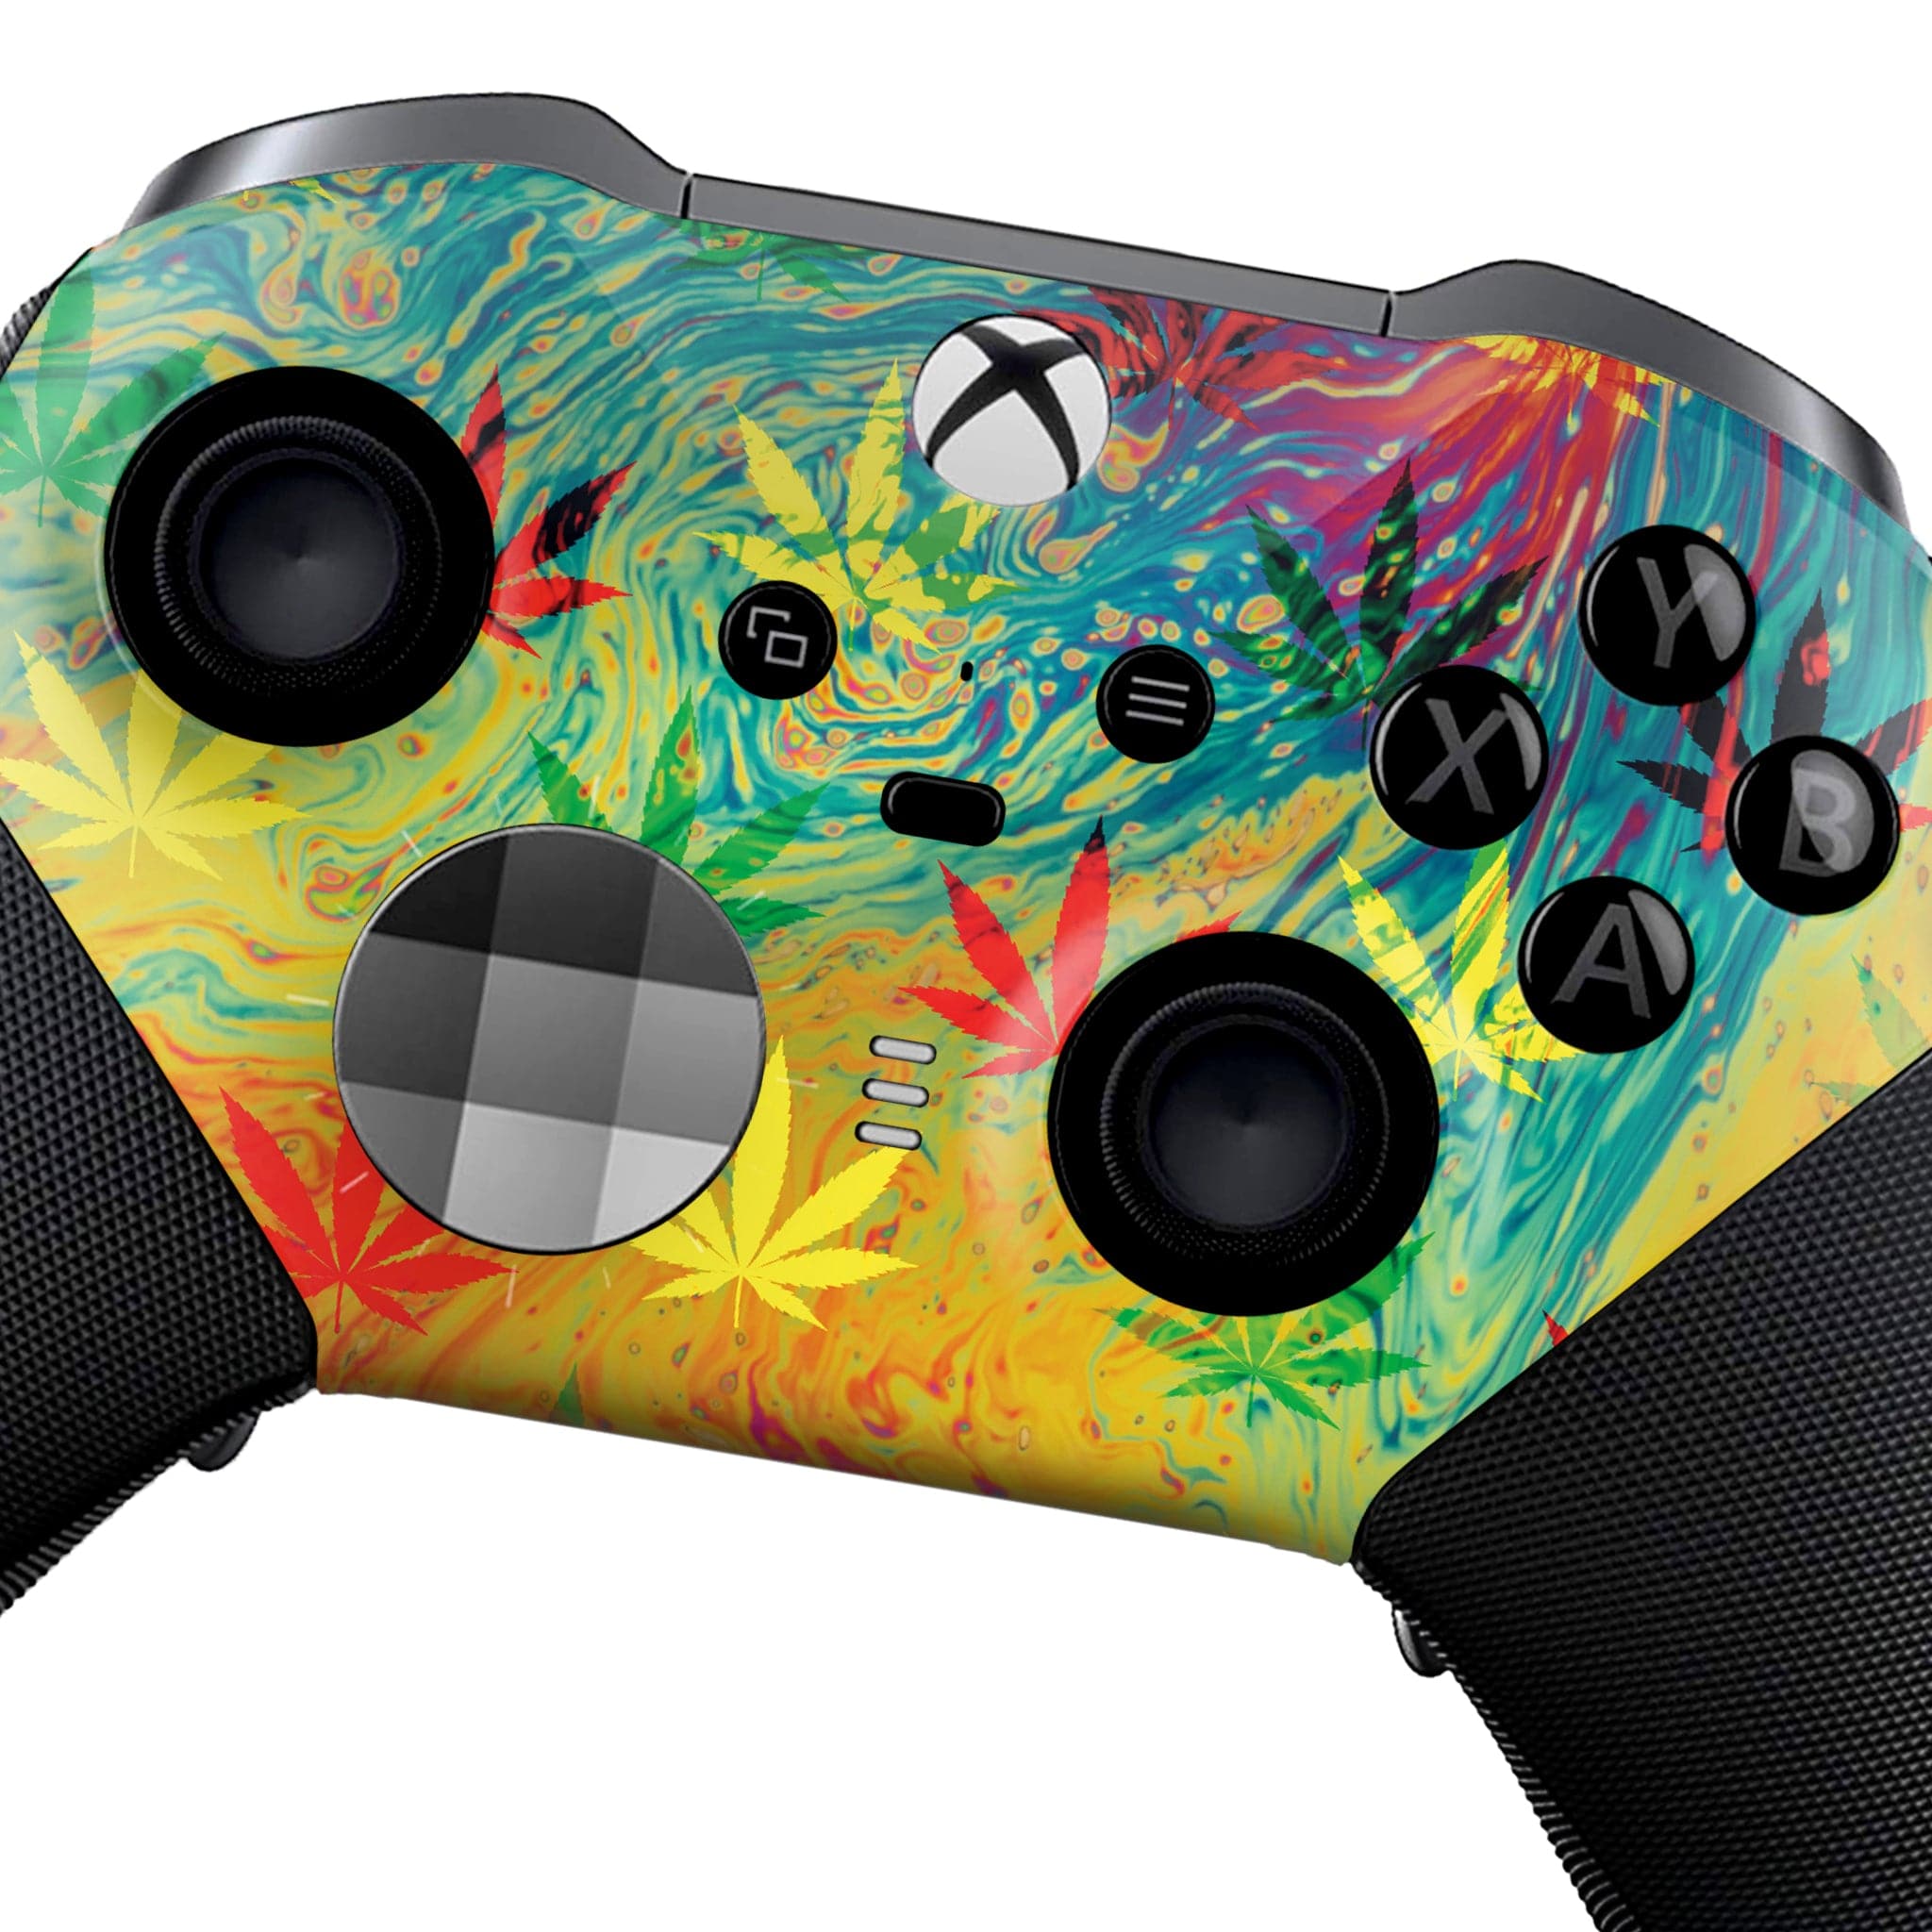 Trippy Weed Xbox Elite Series 2 Controller - Dream Controller